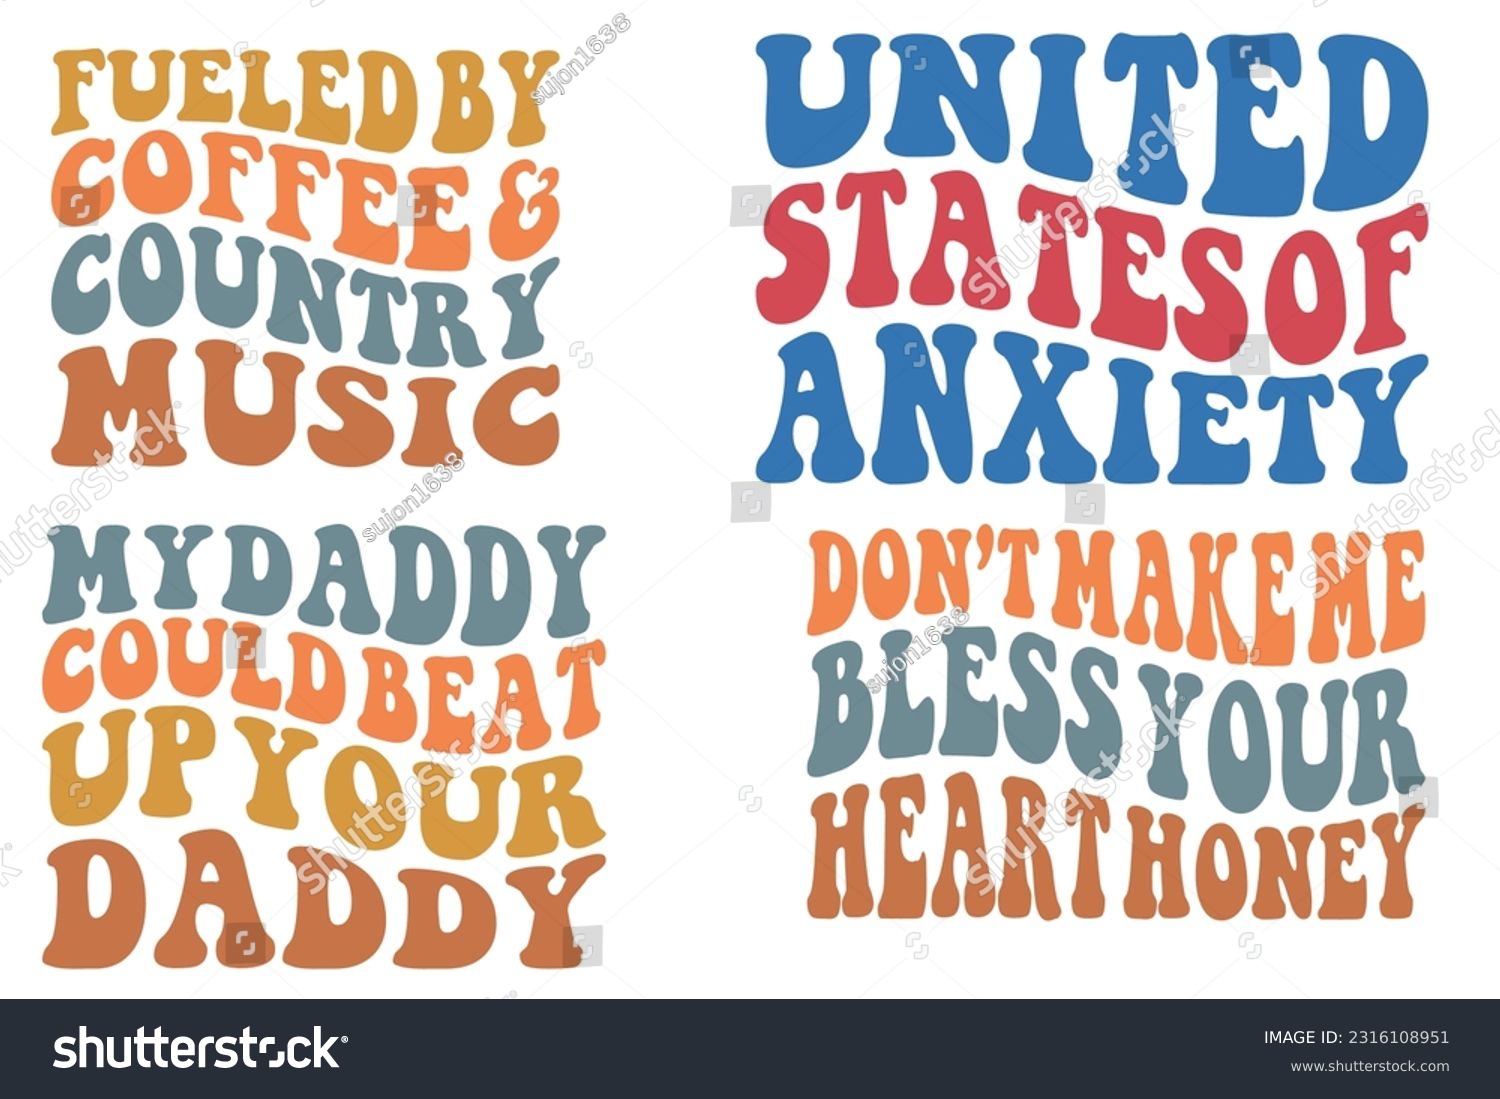 SVG of  Fueled by coffee and country music, United States of anxiety, my daddy could beat up your daddy, don't make me bless your heart honey retro wavy SVG bundle T-shirt designs svg